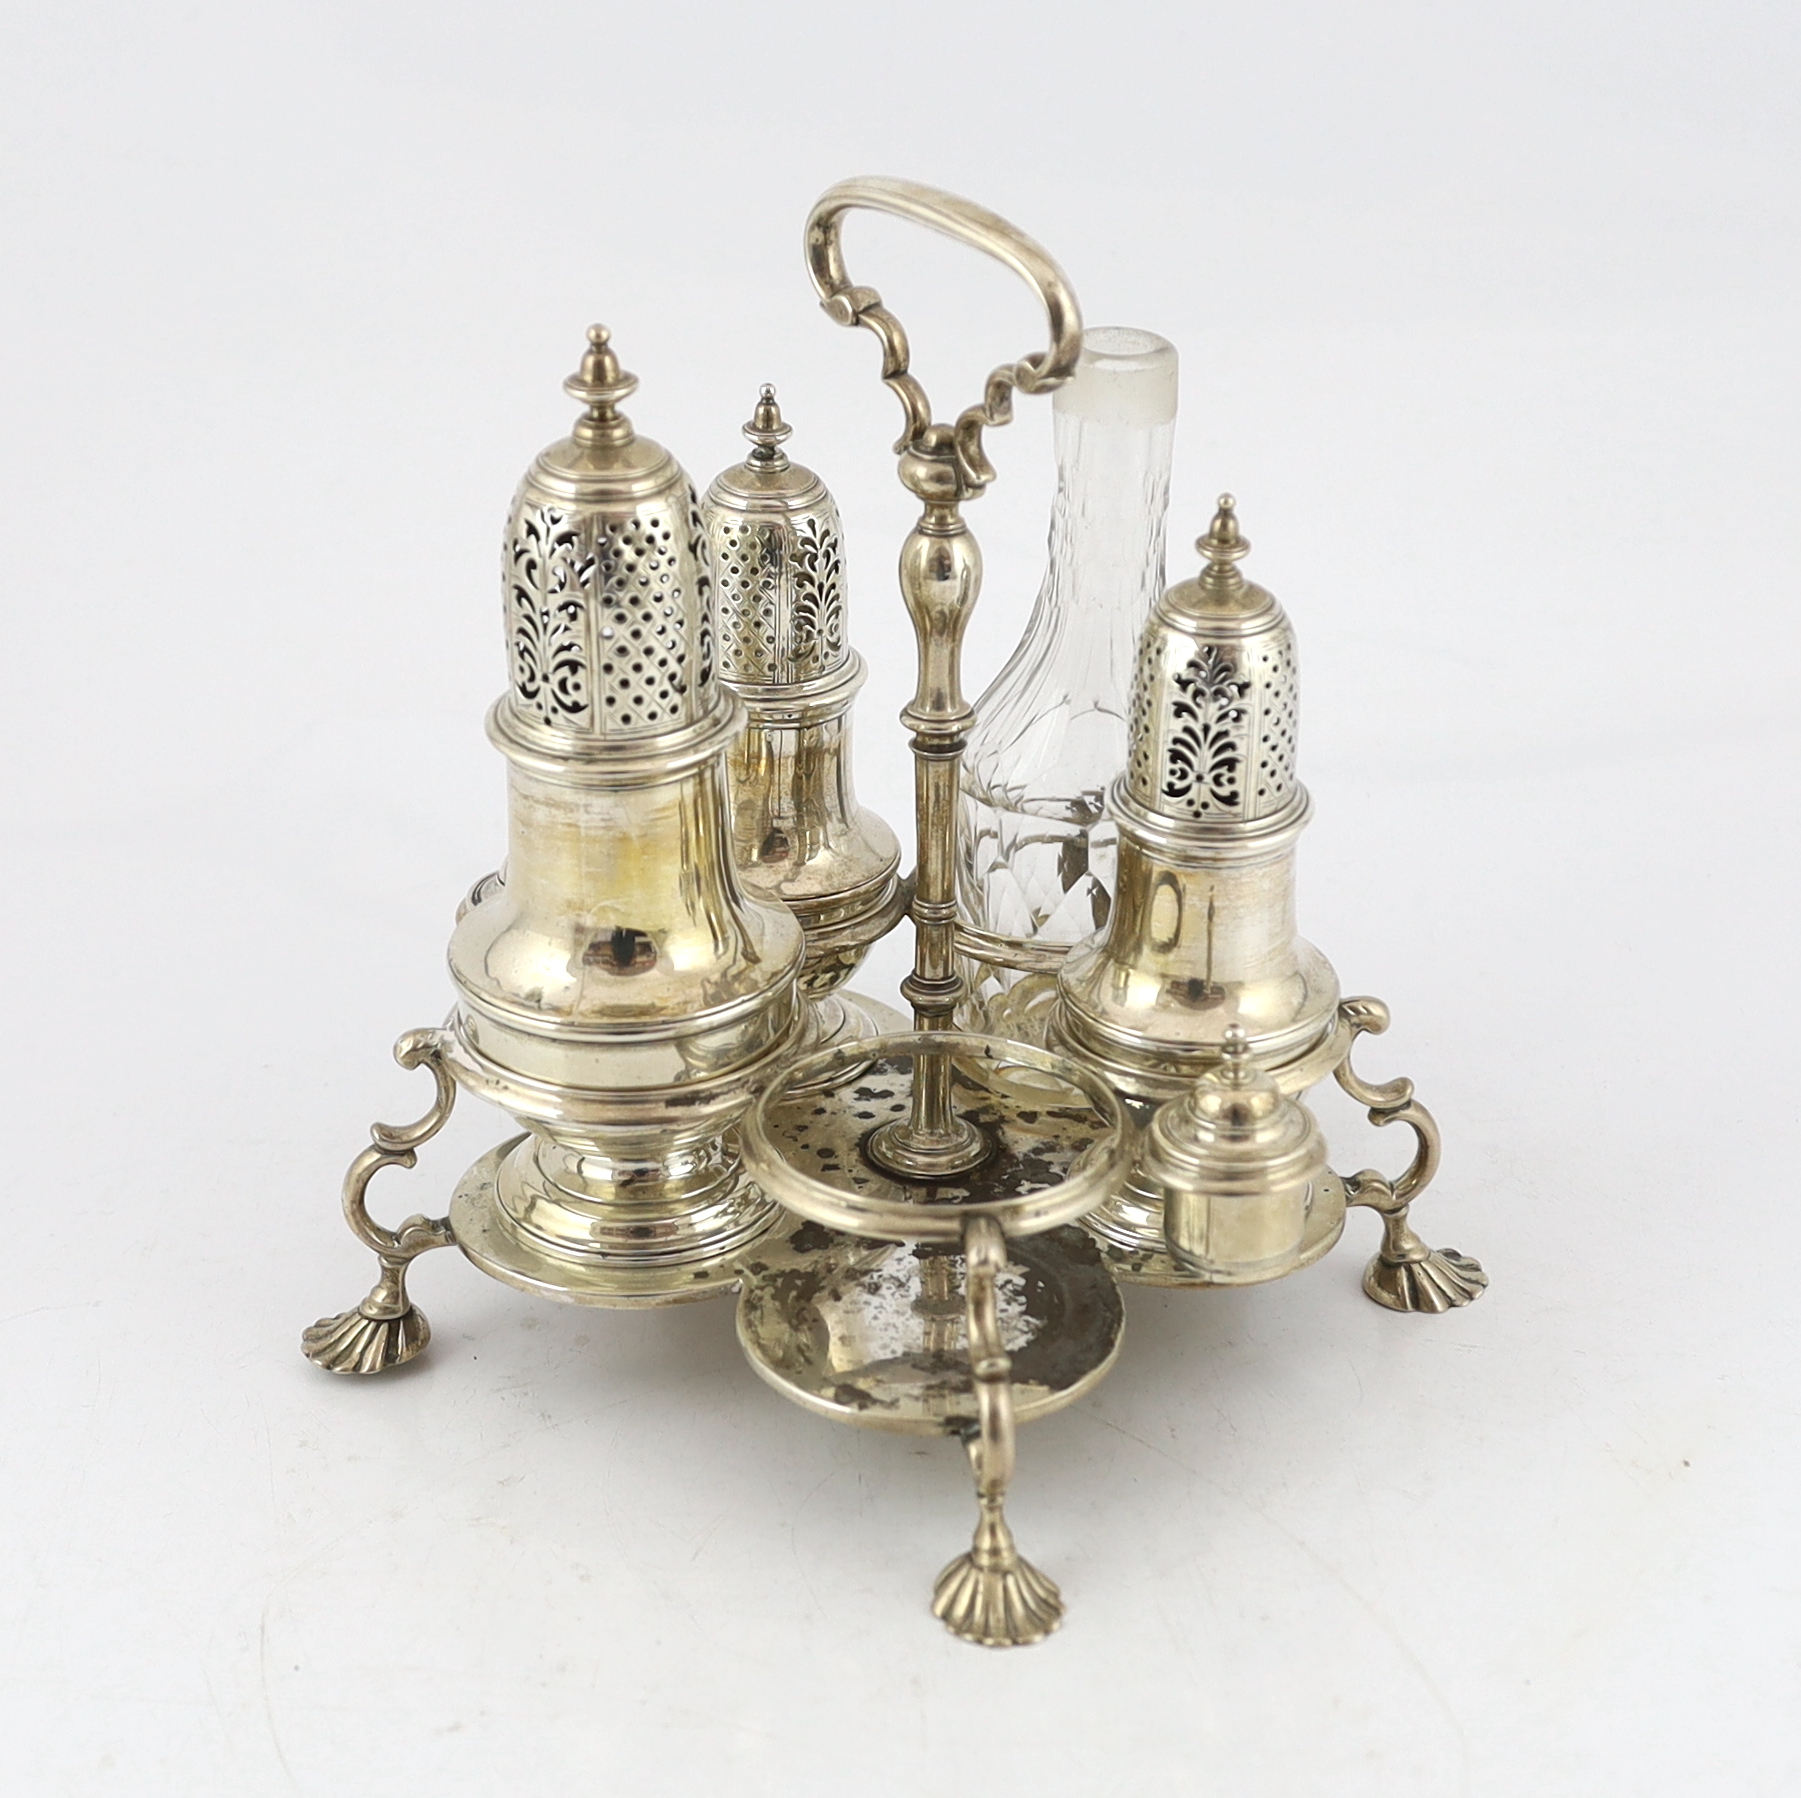 A George II silver cruet stand, with three matching graduated casters, by Samuel Wood